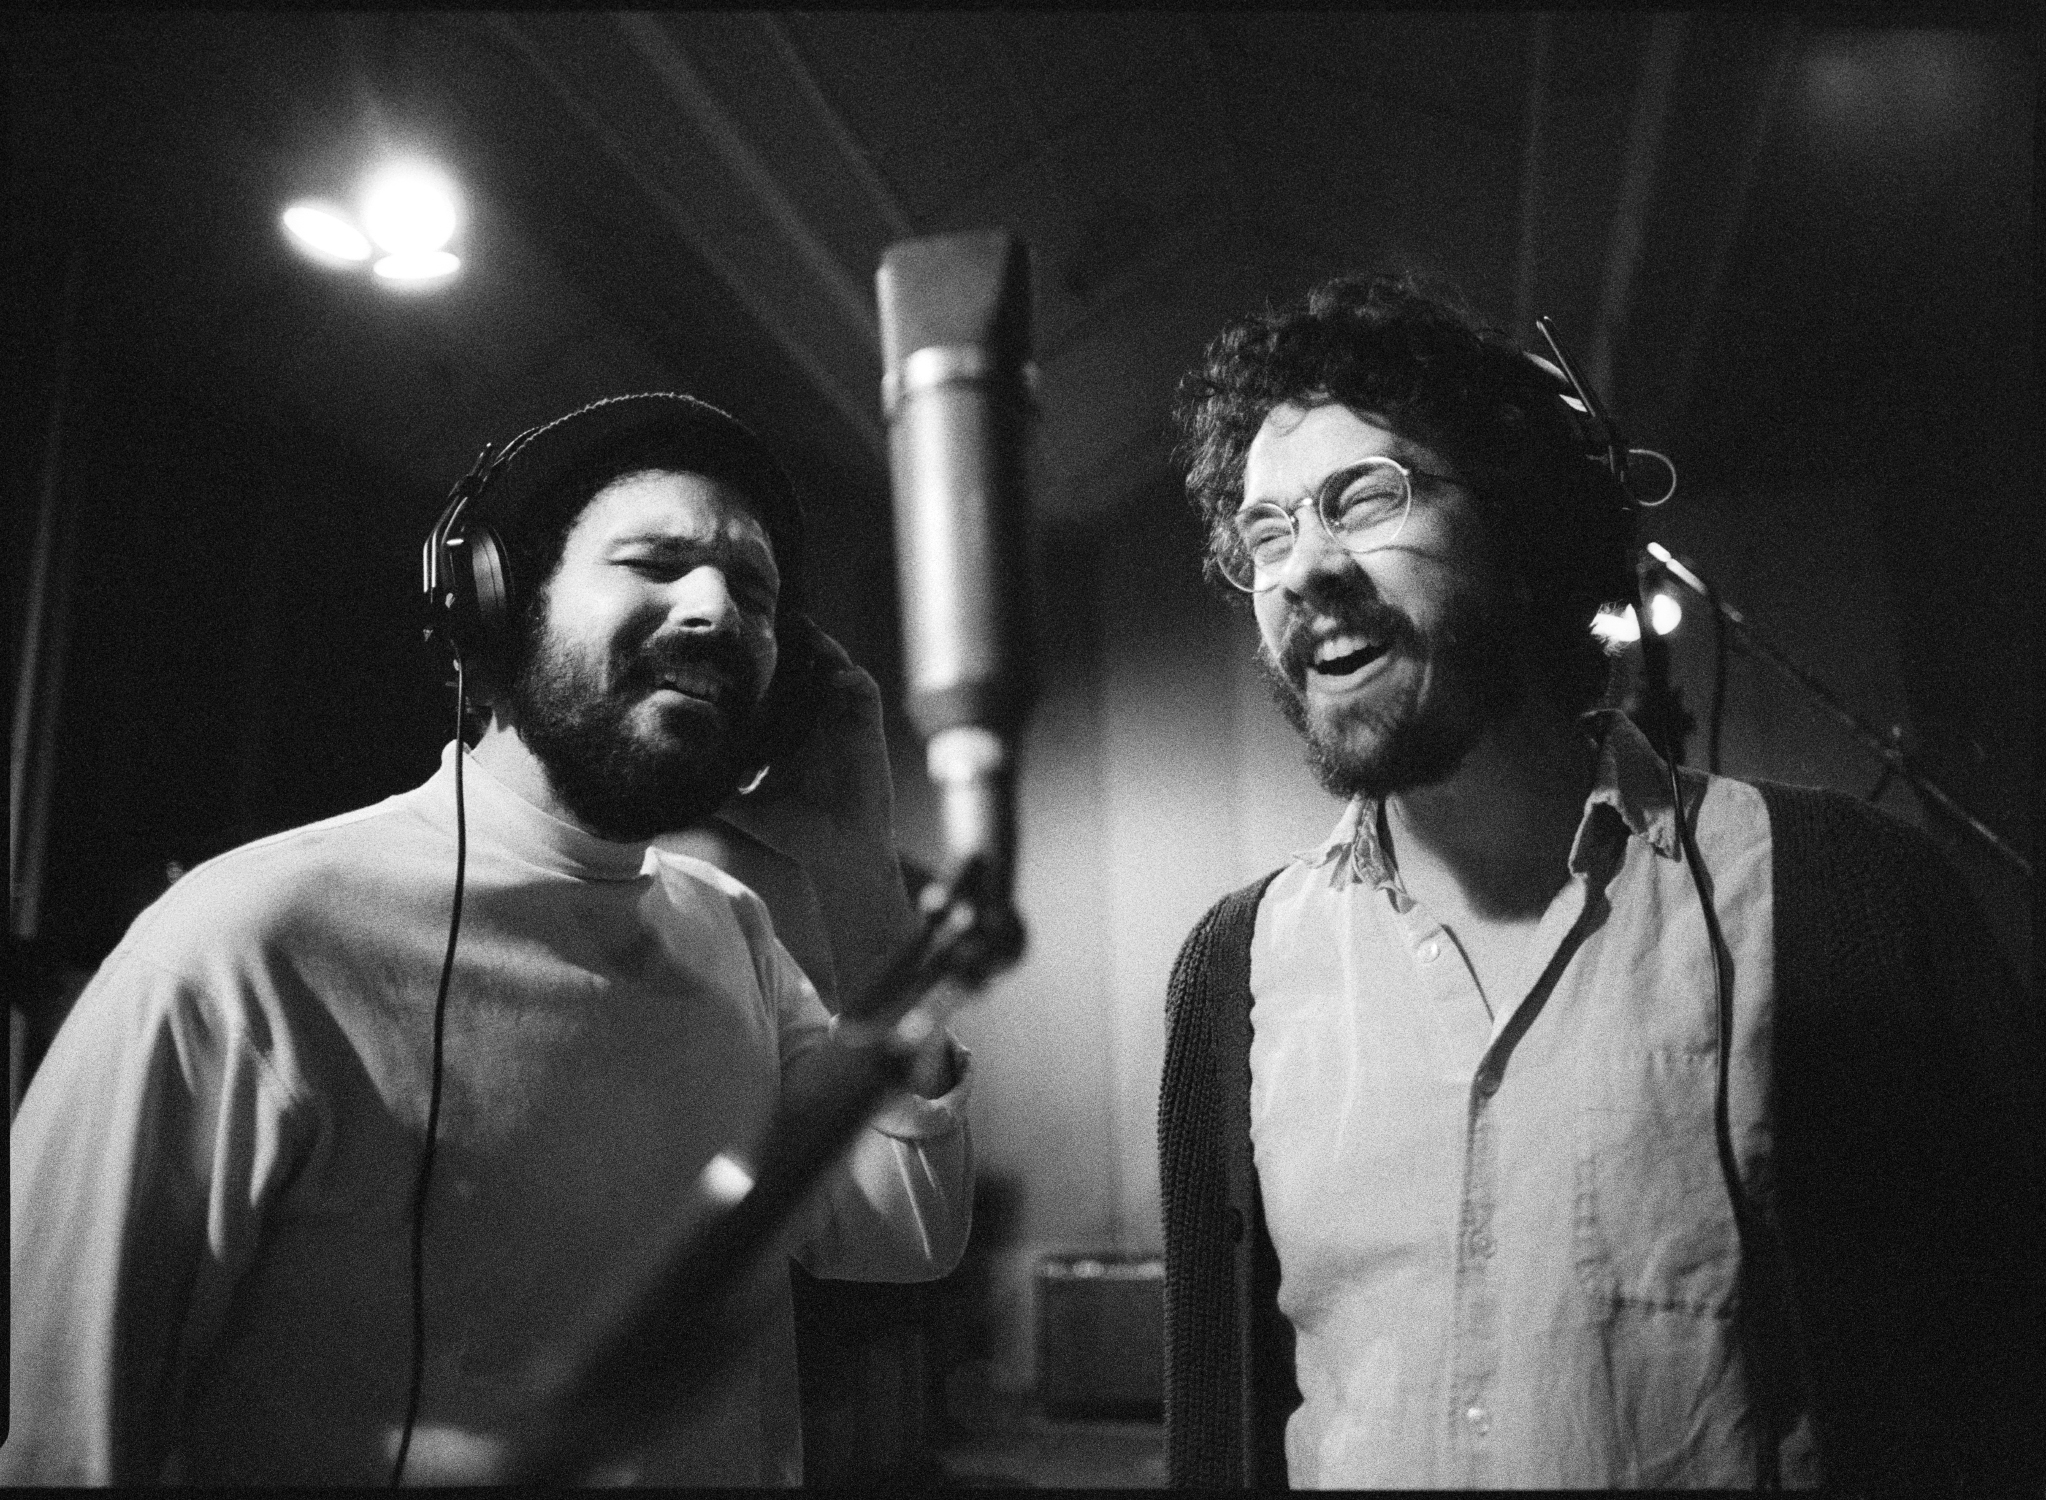 Jerry Bernhardt and Dom Billett tracking backup vocals at Sam Phillips recording in Memphis, TN